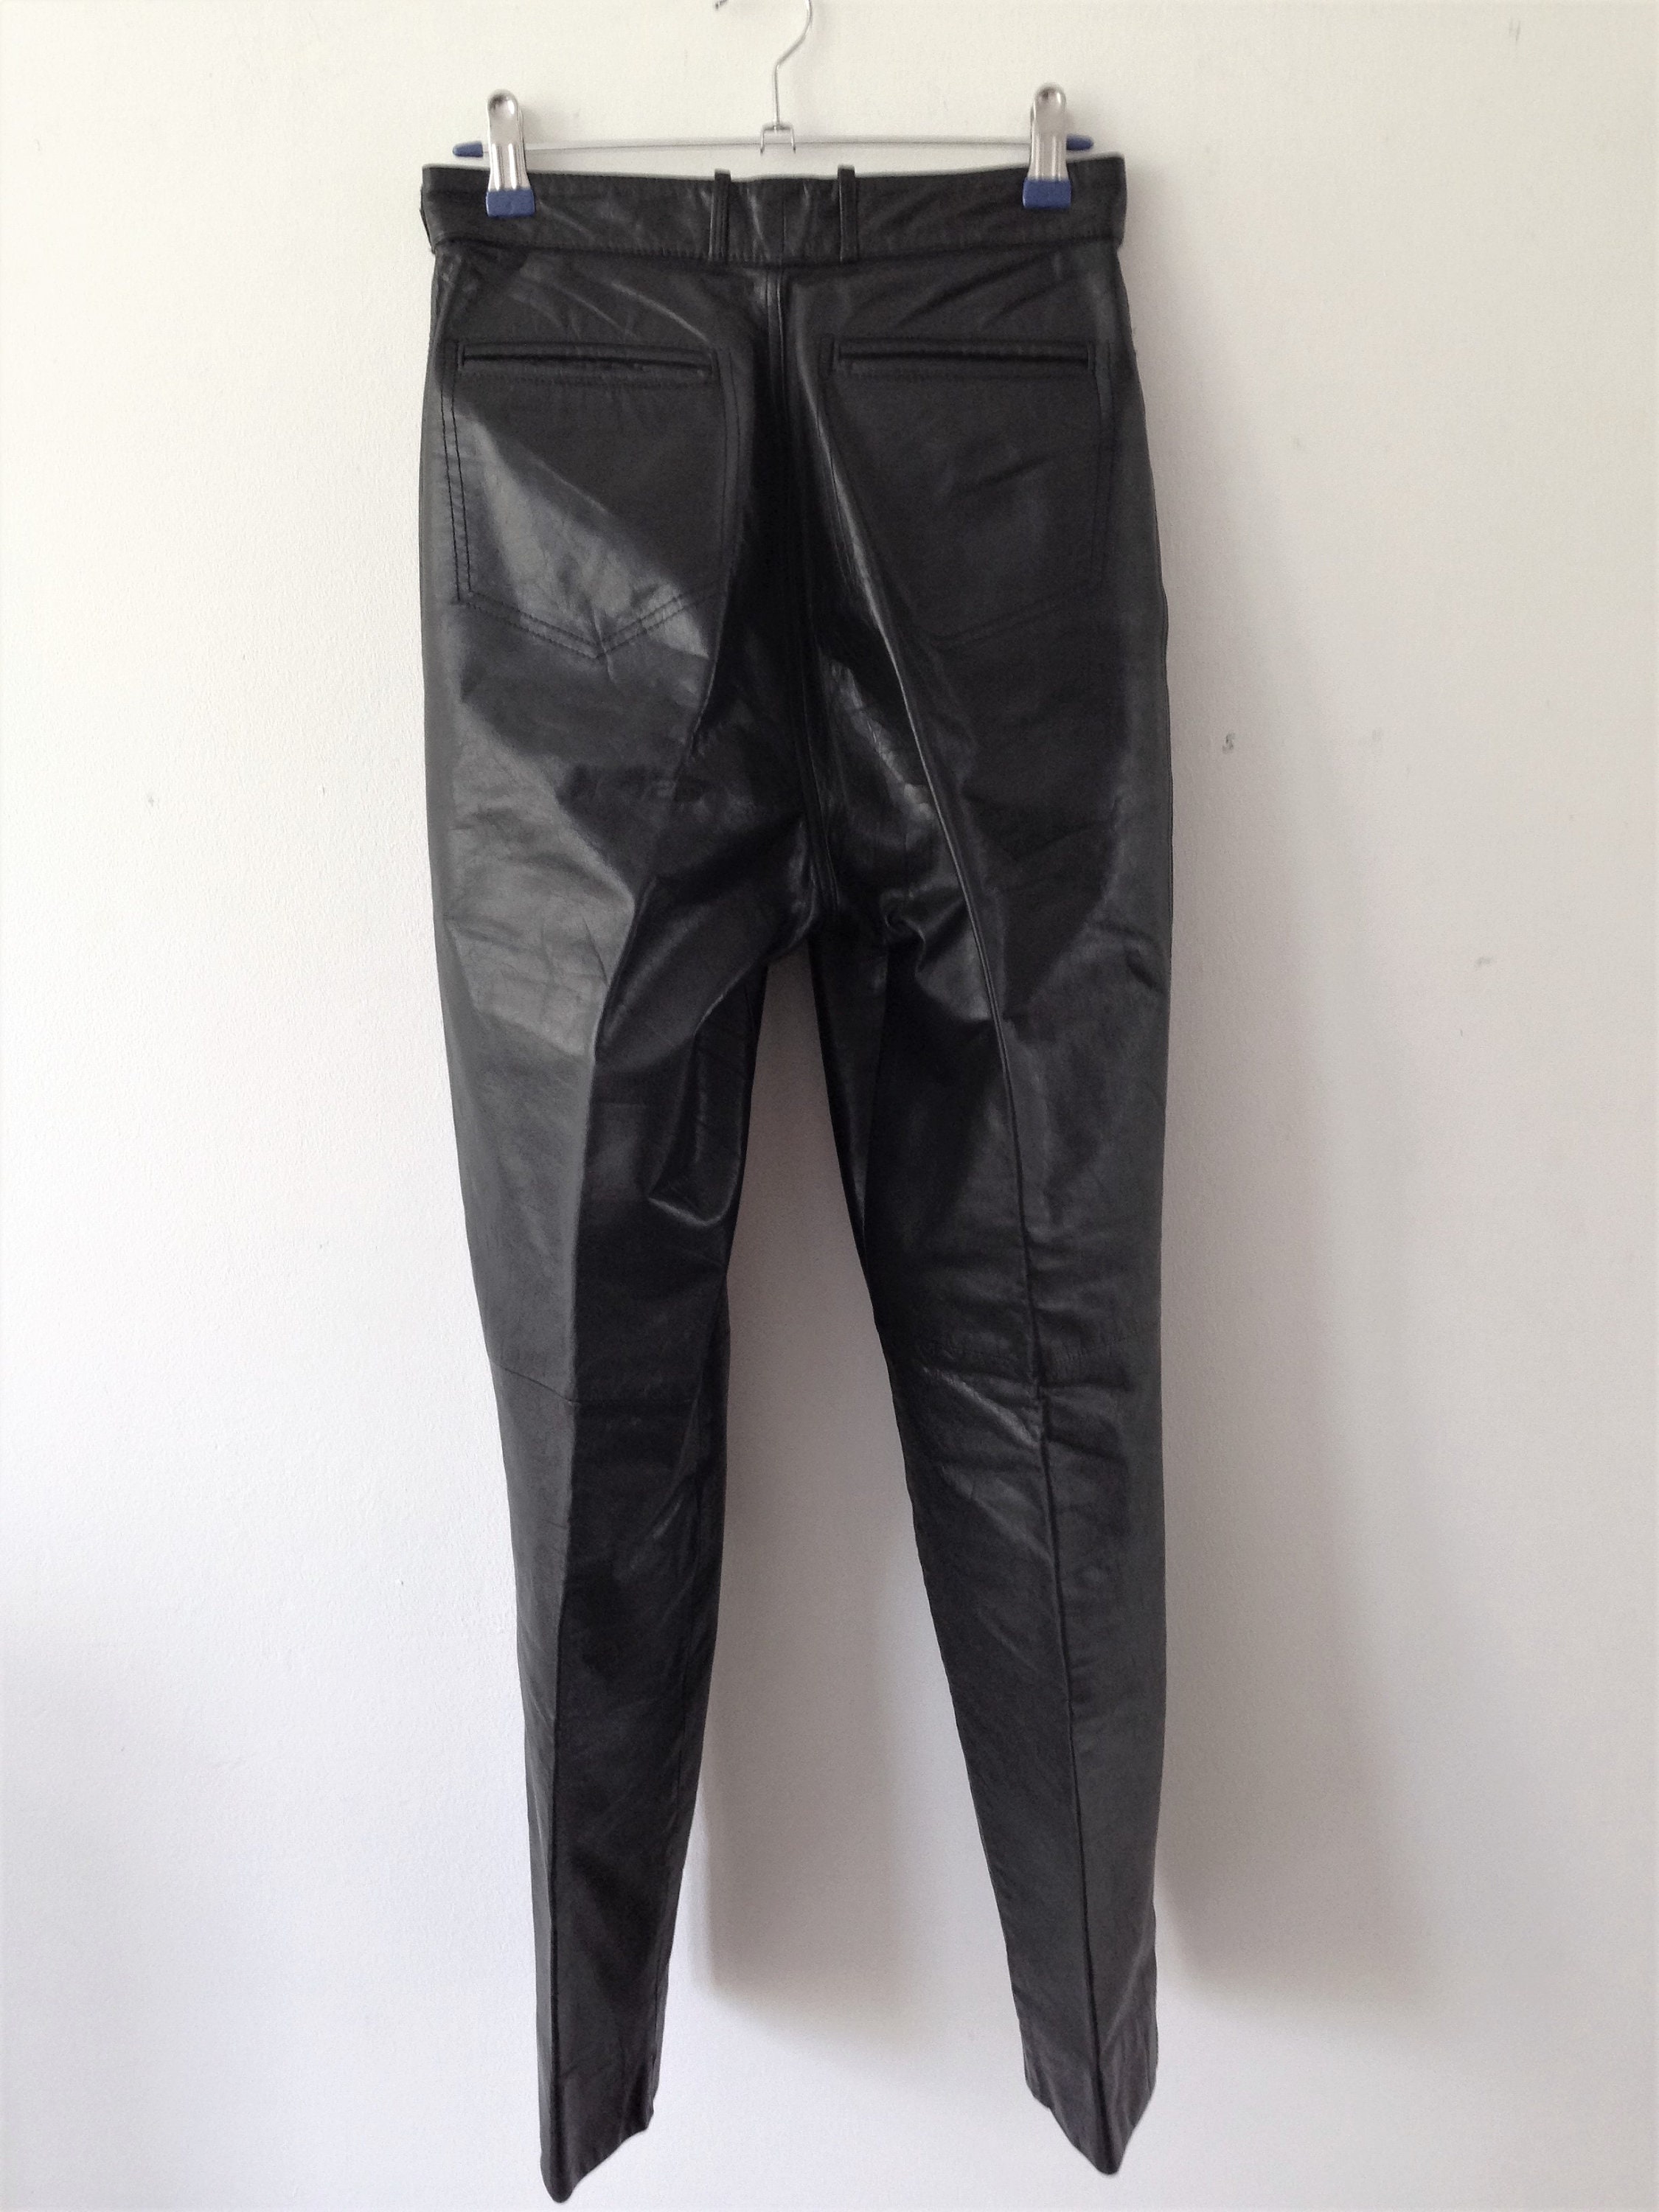 Vintage Leather 80s High Waist Pants // Vintage Ultra High Waisted Black  Leather Lined Pants From the 80s // SIZE SMALL /S 